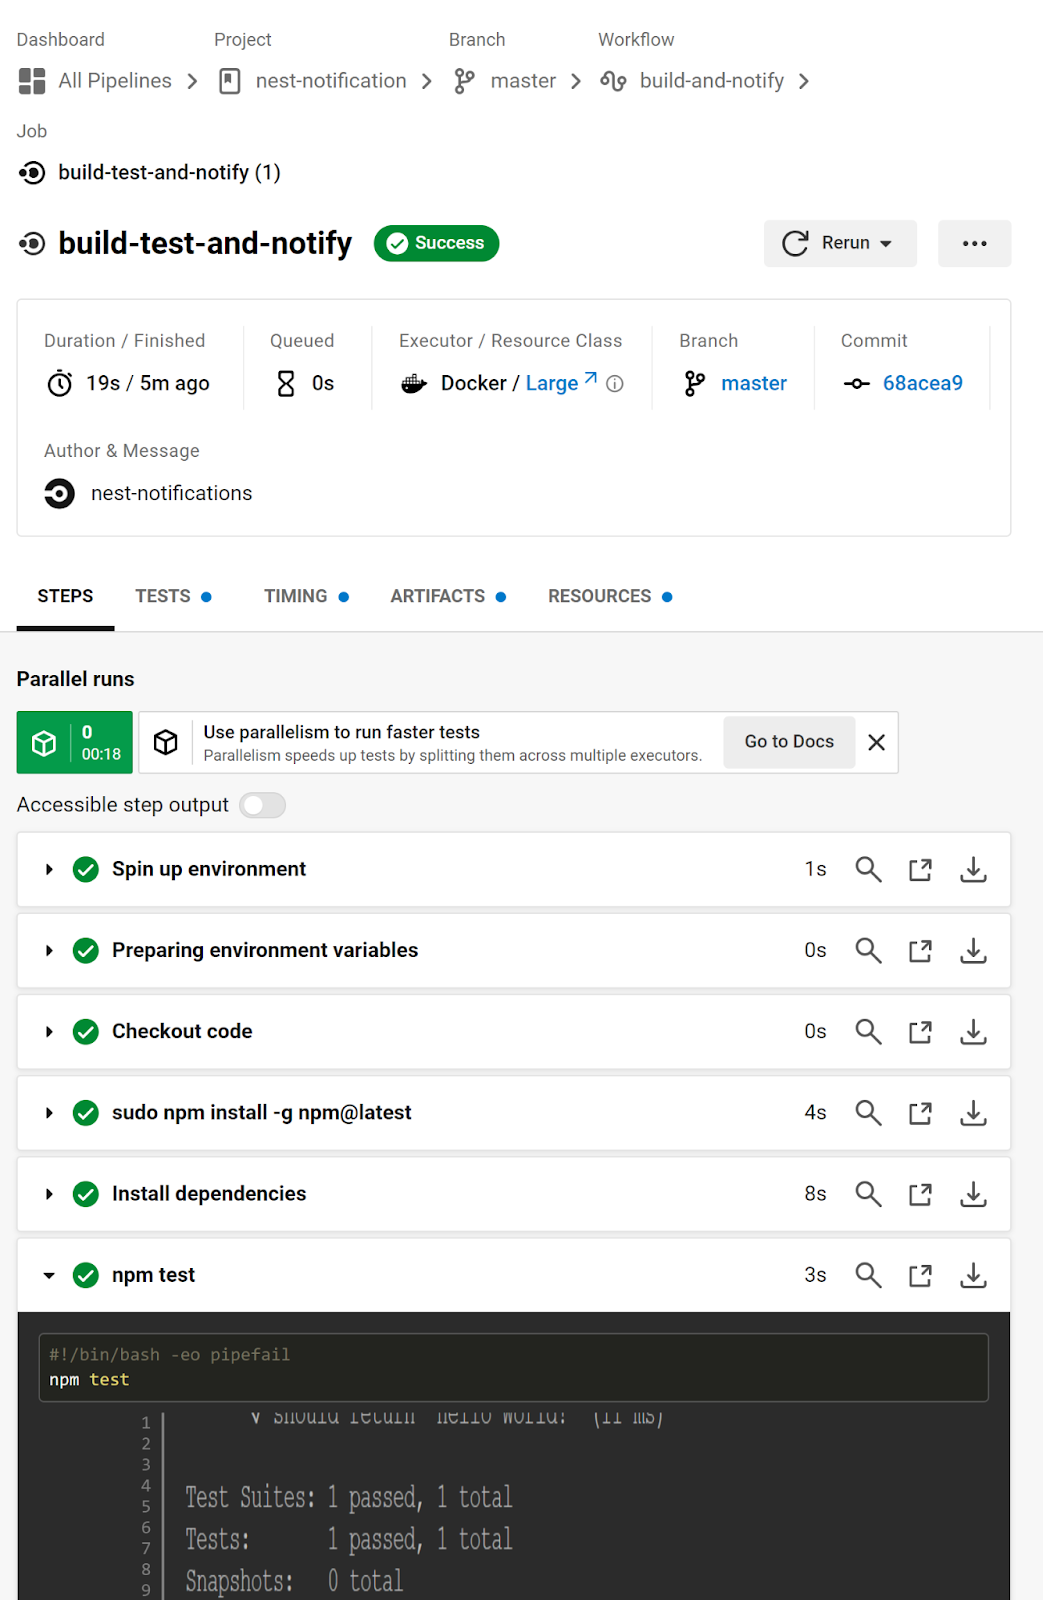 Screenshot showing full details of the build-and-notify workflow in CircleCI